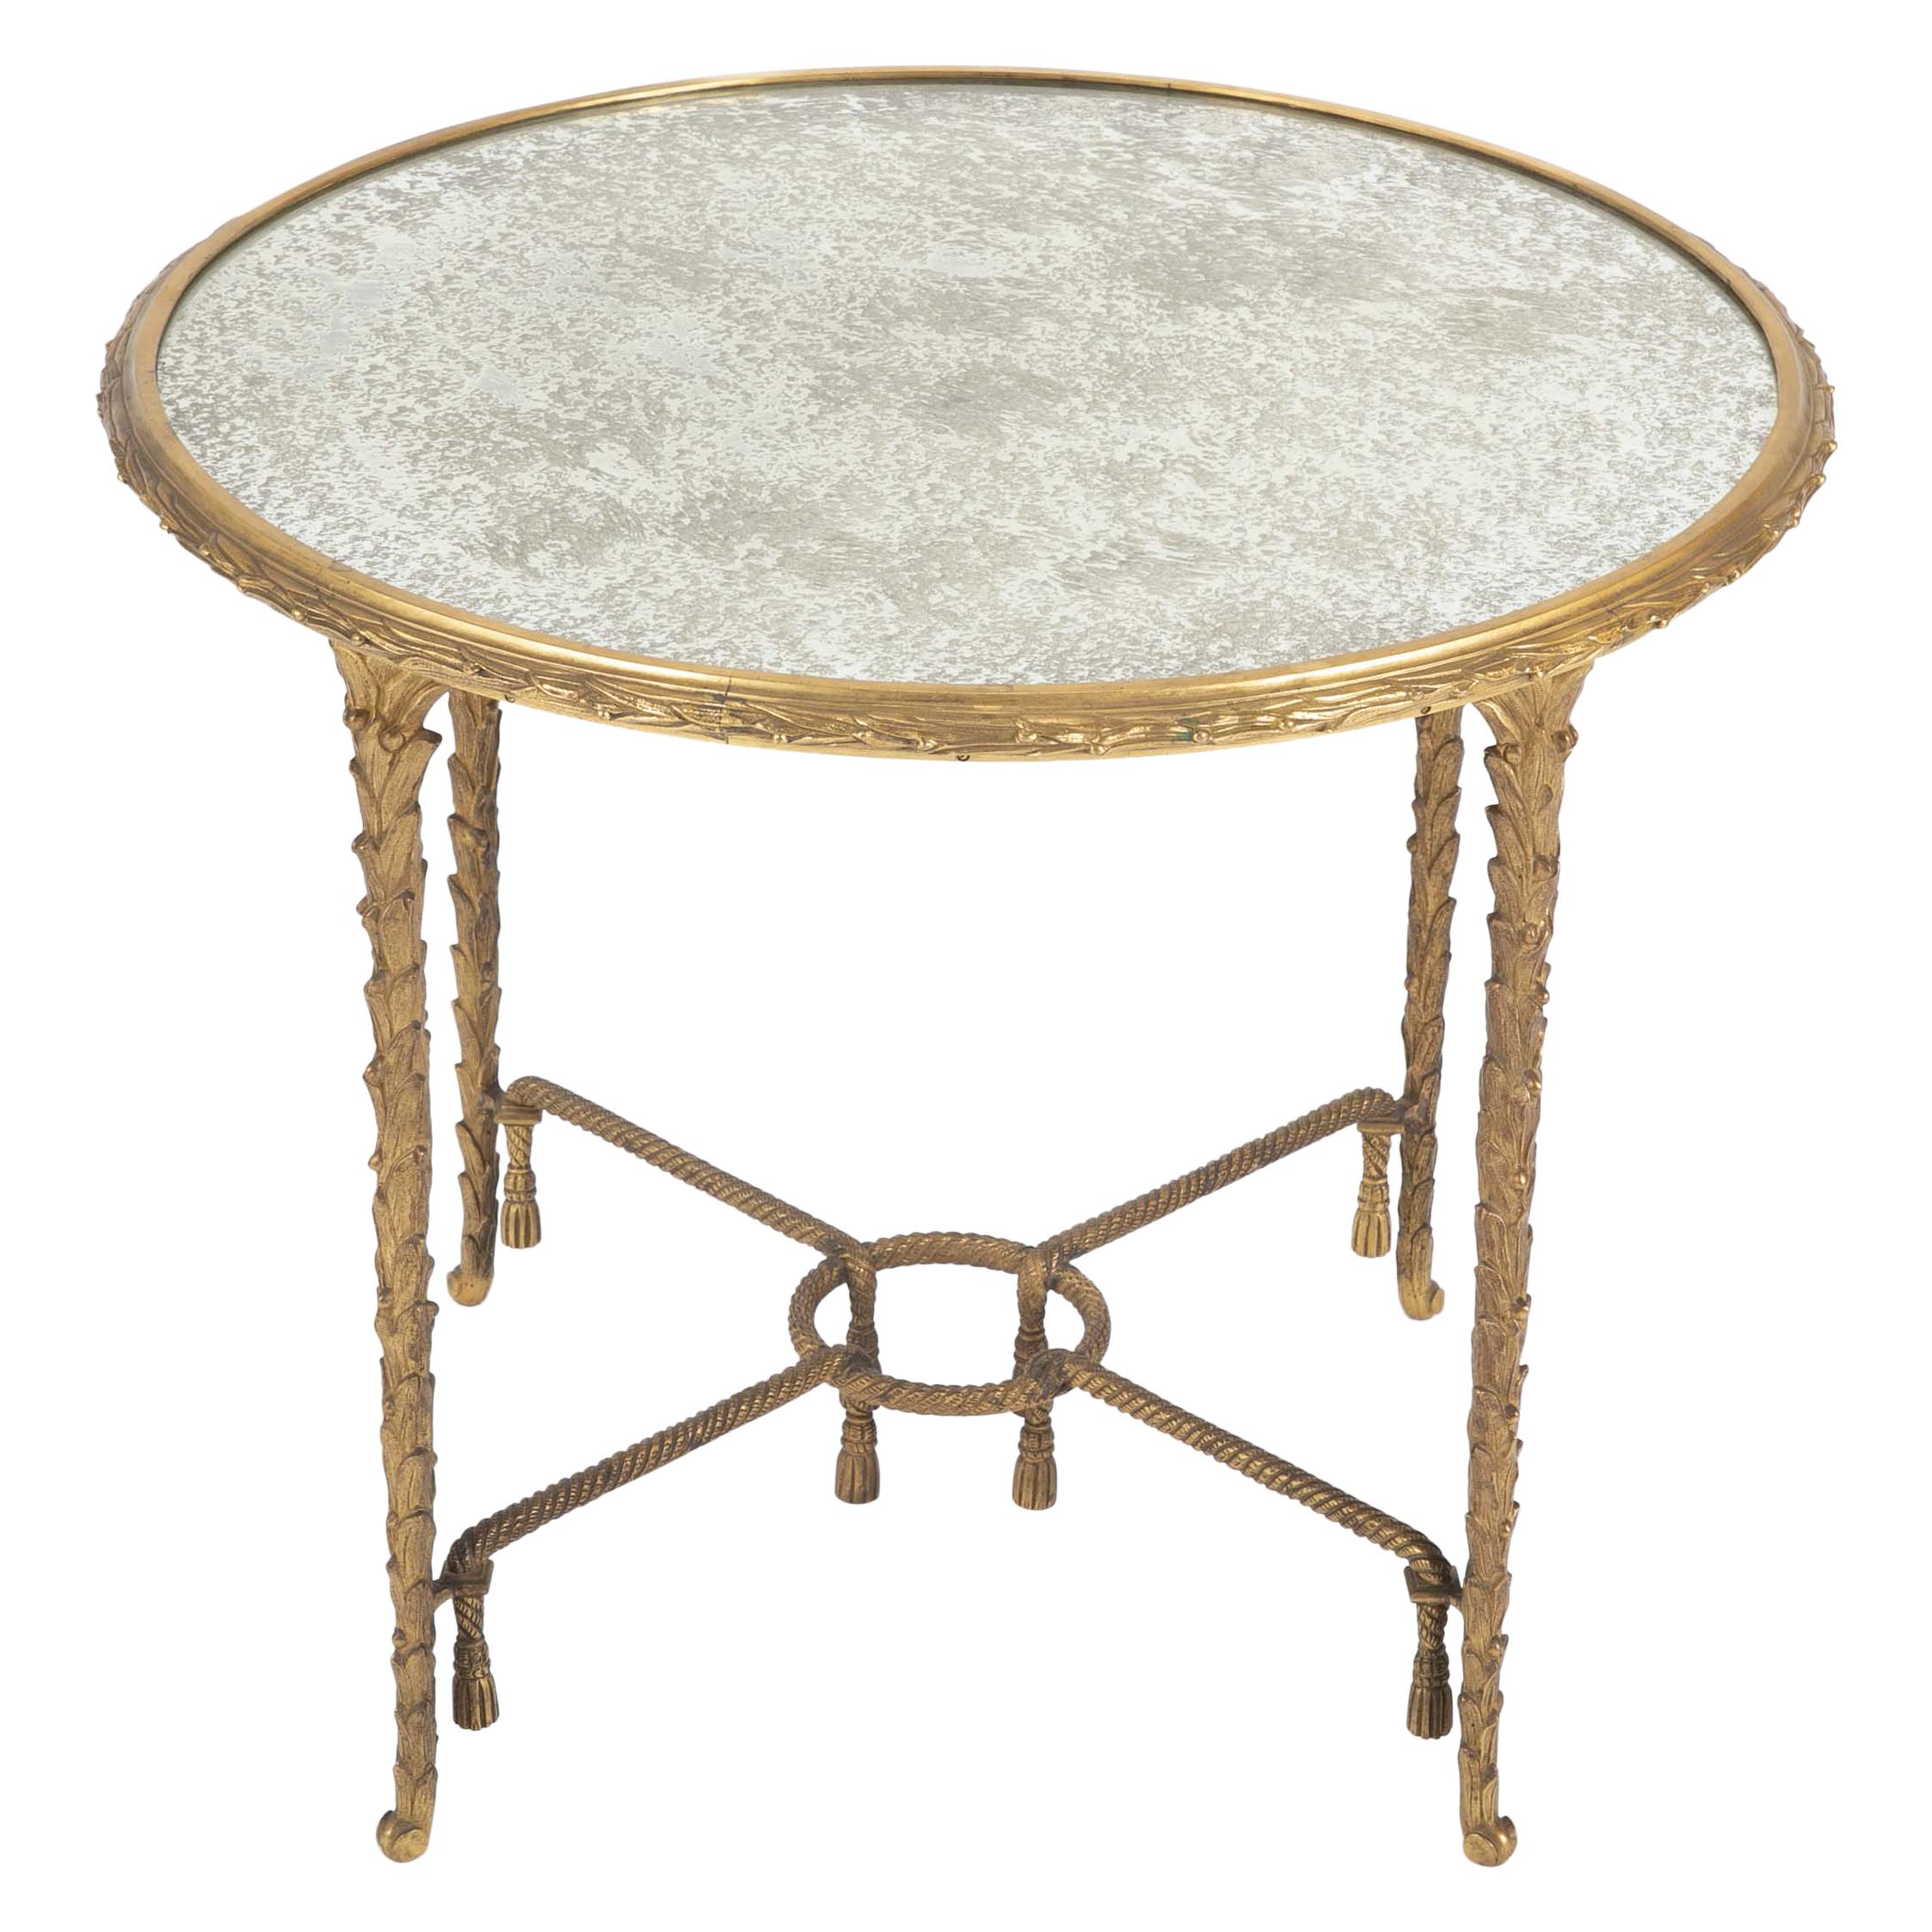 Maison Charles Bronze Mirrored Top Side Table